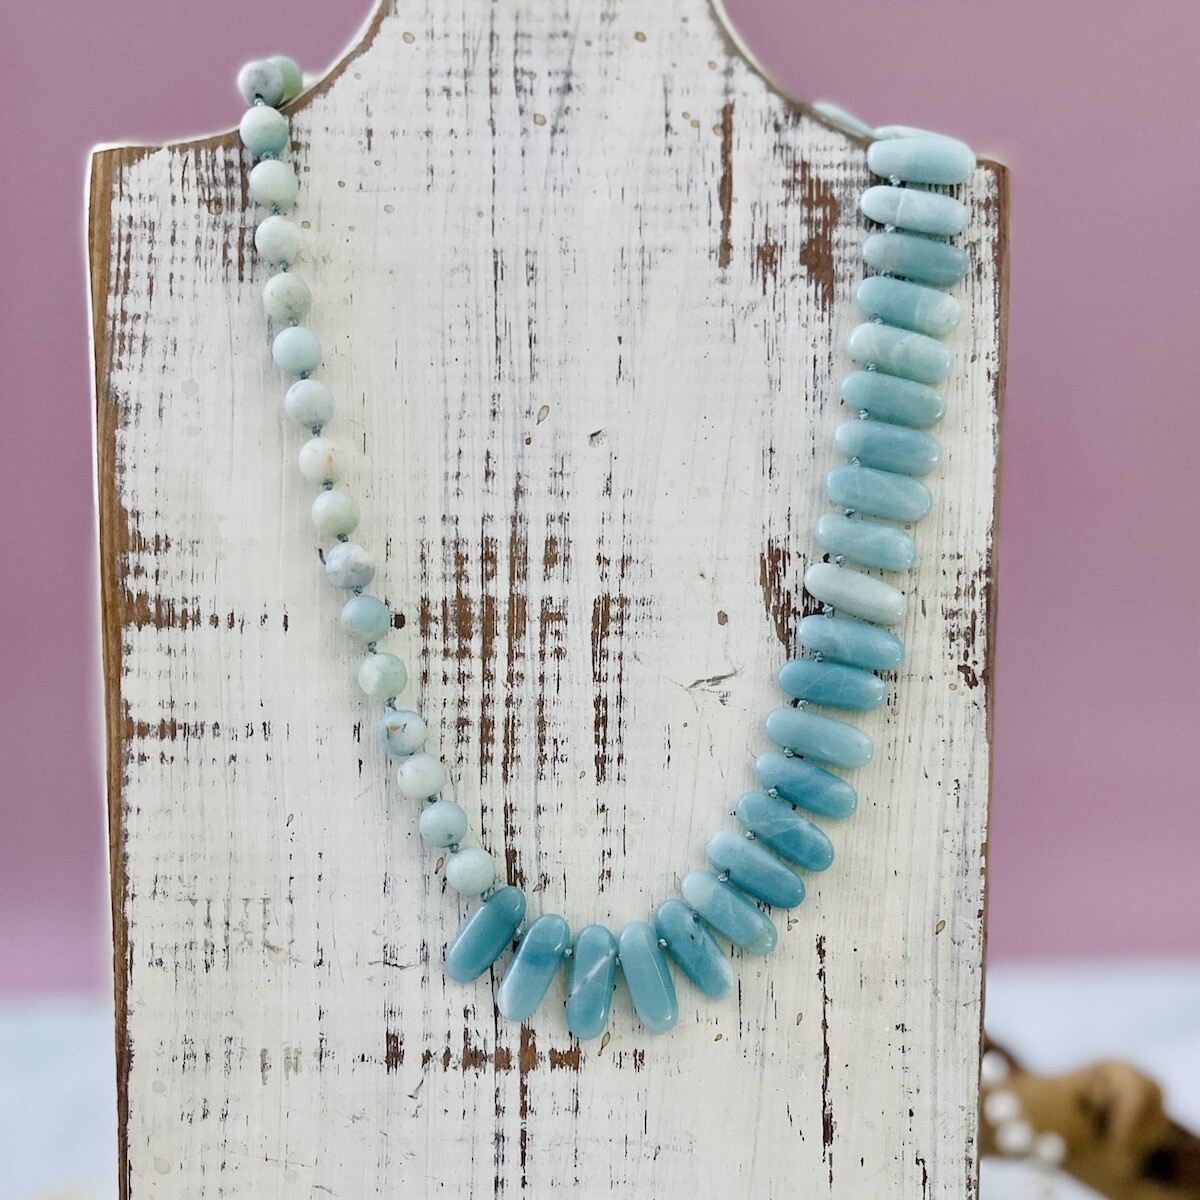 Handmade Necklace with matte amazonite and rounded briolettes knotted on hand dyed aquamarine silk